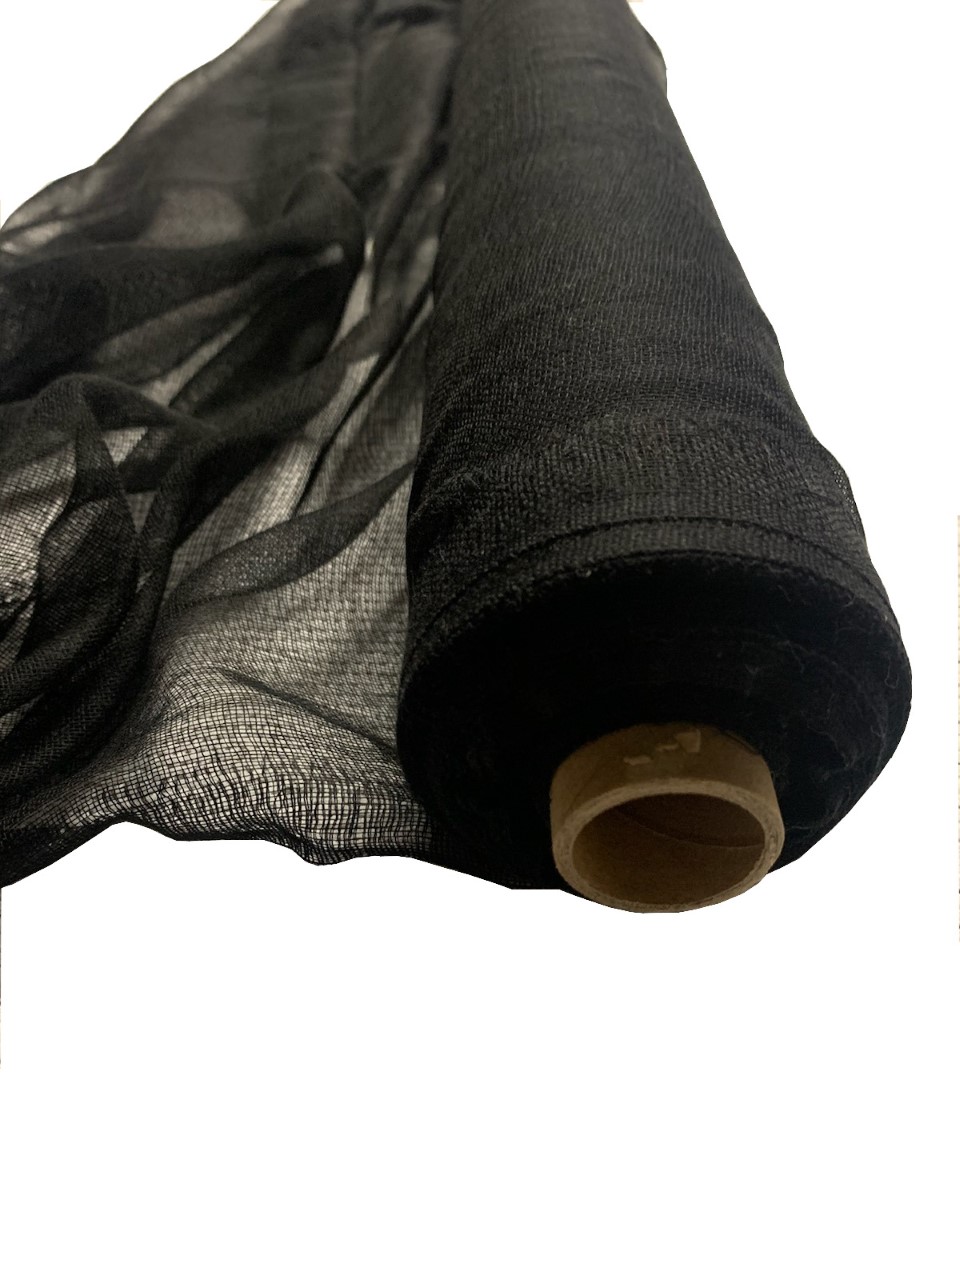 36" Black Cheesecloth 100 Foot Roll - 100% Cotton